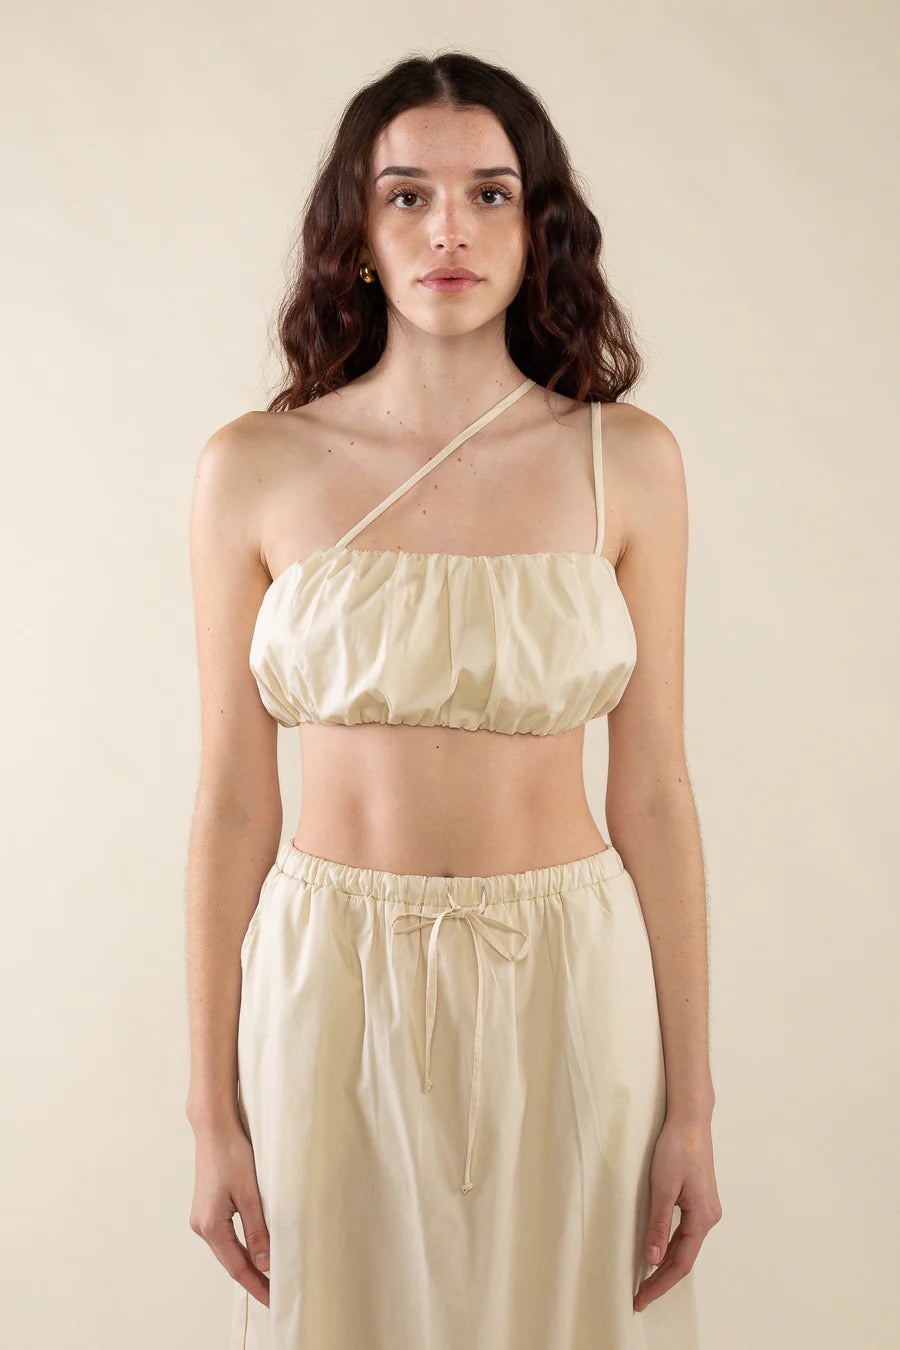 Odette Poplin Top in Natural top No Less Than 